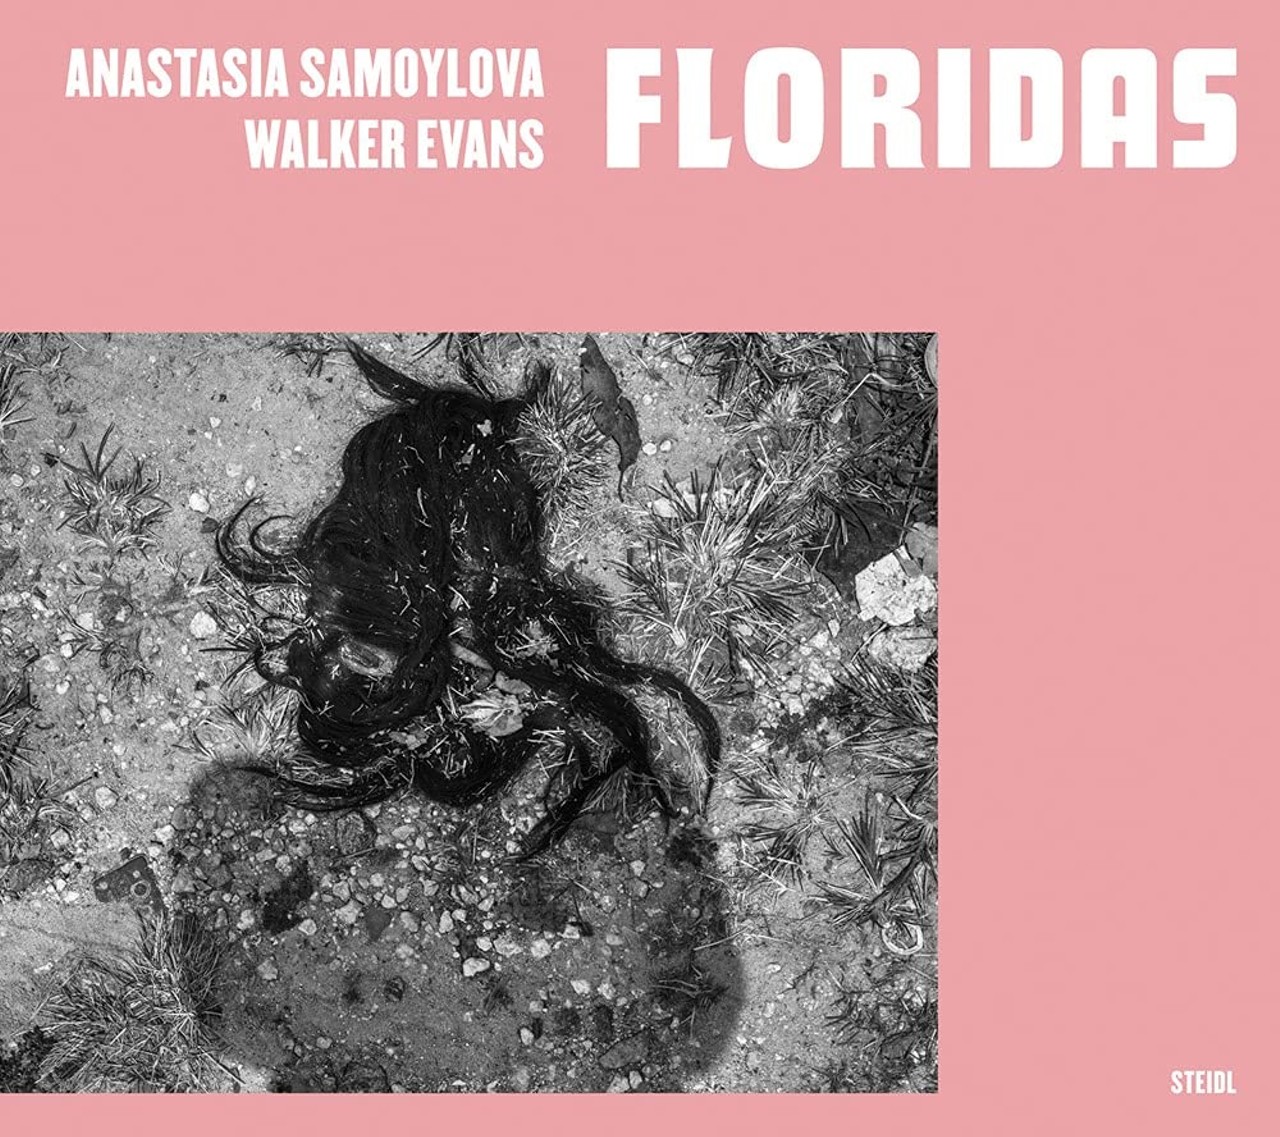 
Anastasia Samoylova & Walker Evans: Floridas
Miami photographer Anastasia Samoylova’s latest book made Smithsonian Magazine’s list of “10 Best Photography Books of 2022.” The book, published by German publishing house Steidl in May, is a collaboration between Samoylova and late photographer Walker Evans. Samoylova discovered Evans’ work while traveling the state of Florida for her first book, 2020’s “FloodZone.” Like Samoylova, Evans took a minimalist approach to photographing Florida. ToMiami New Times, Samoylova expressed an “aesthetic kinship” with Evans, whose archival photographs accompany hers in Floridas. Together, Evans’ and Samoylova’s photos deliver Florida past alongside Florida present in this pictorial tale of two Floridas.FFO: Looking at pictures instead of reading, Florida
(Steidl, $61)—Jennifer Ring